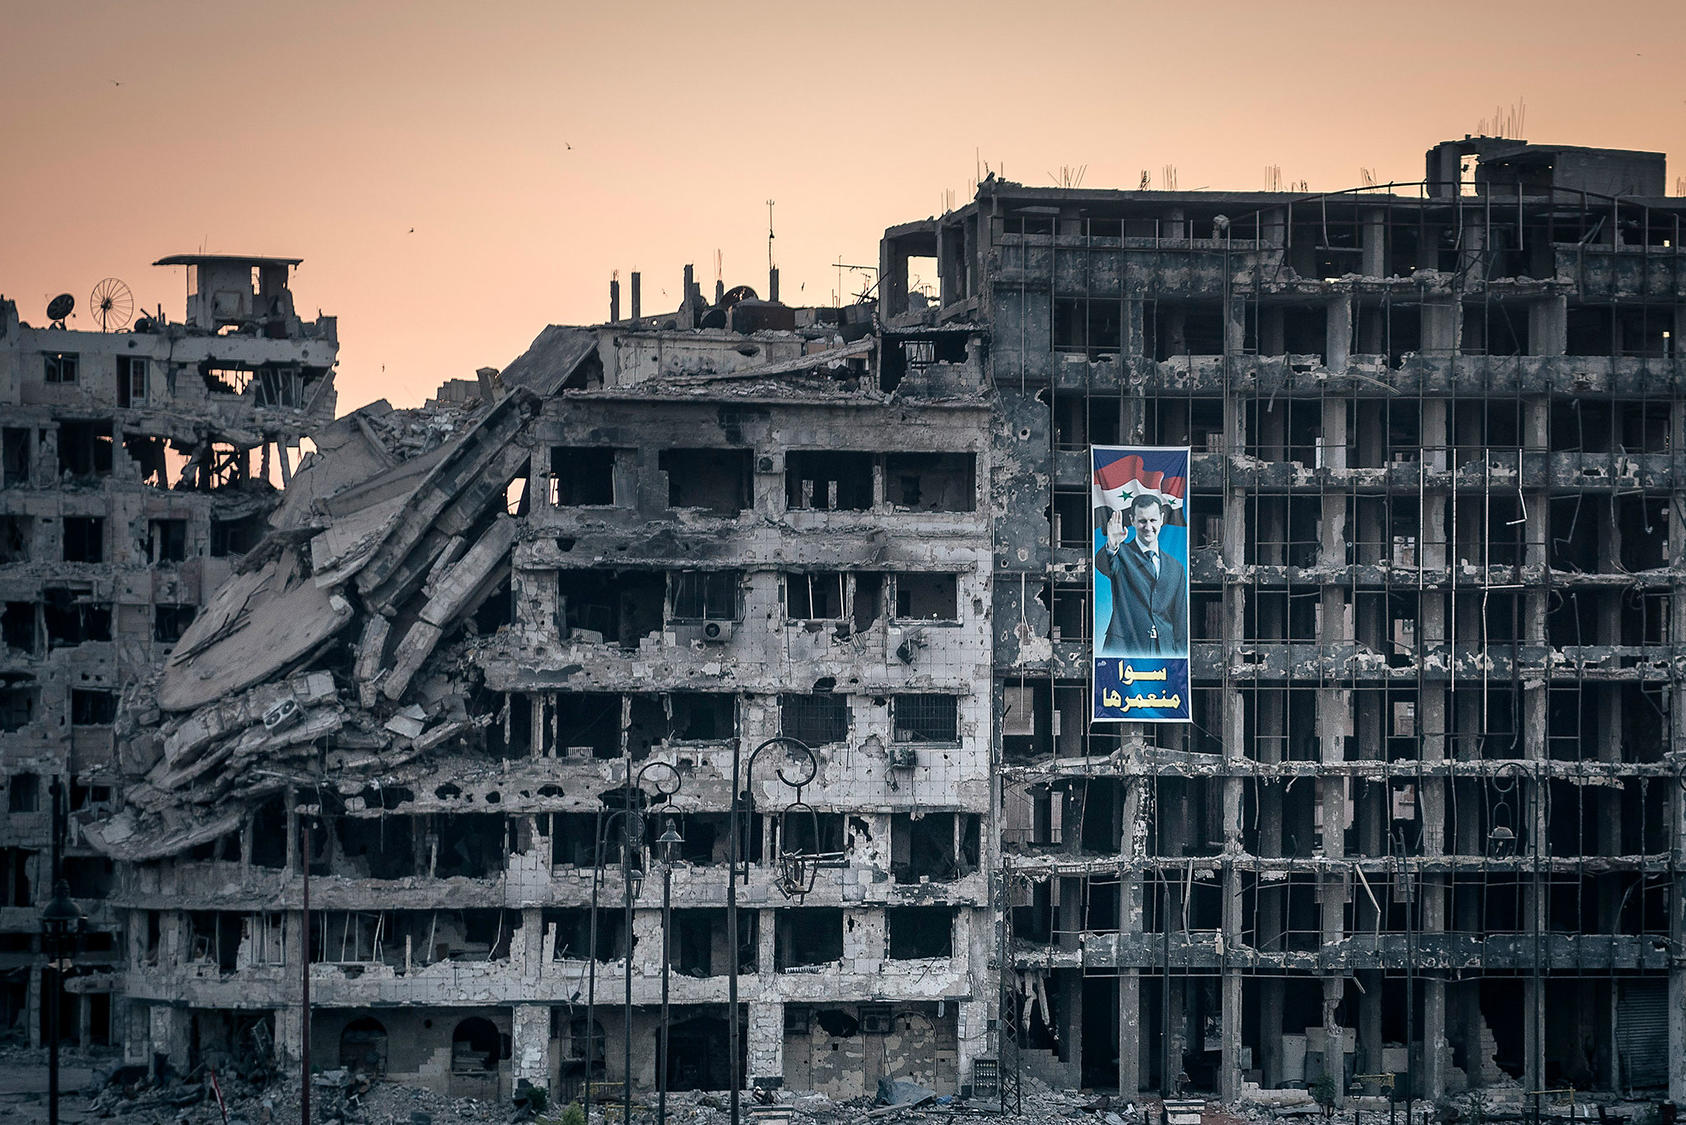 A campaign poster for President Bashar Assad hangs on a destroyed shopping mall in Homs, Syria, June 15, 2014. (Sergey Ponomarev/The New York Times)